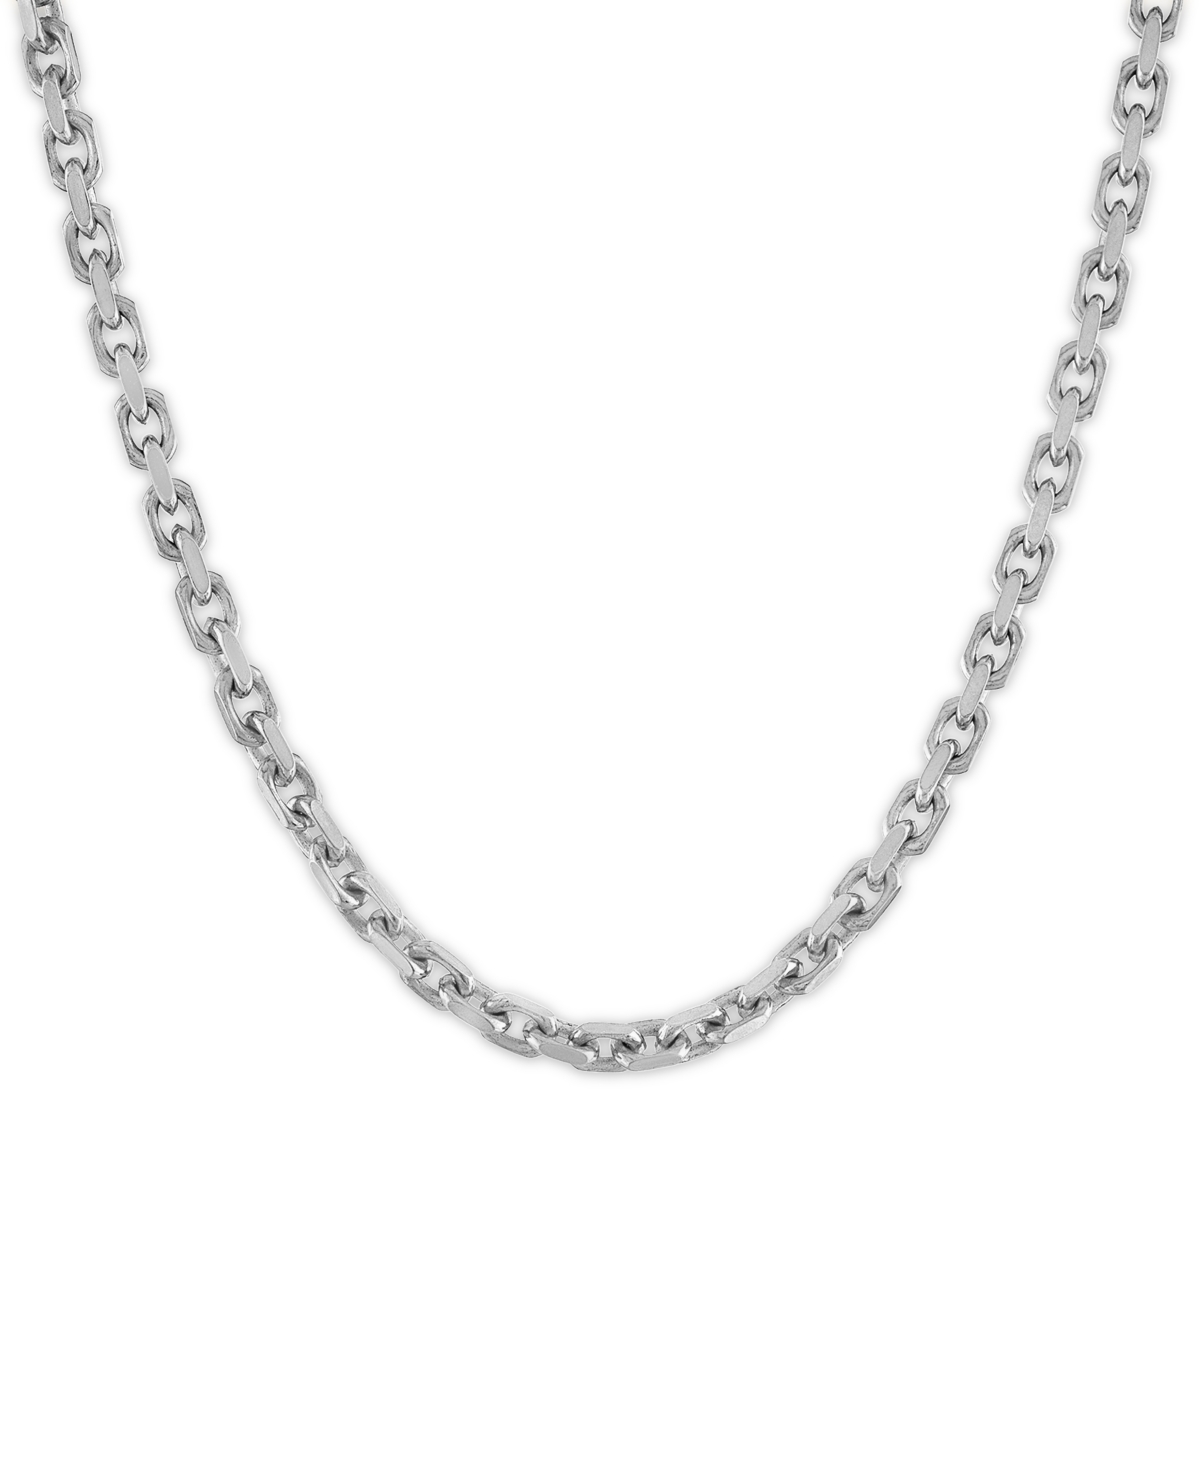 Esquire Men's Jewelry Cable Link 24" Chain Necklace, Created for Macy's